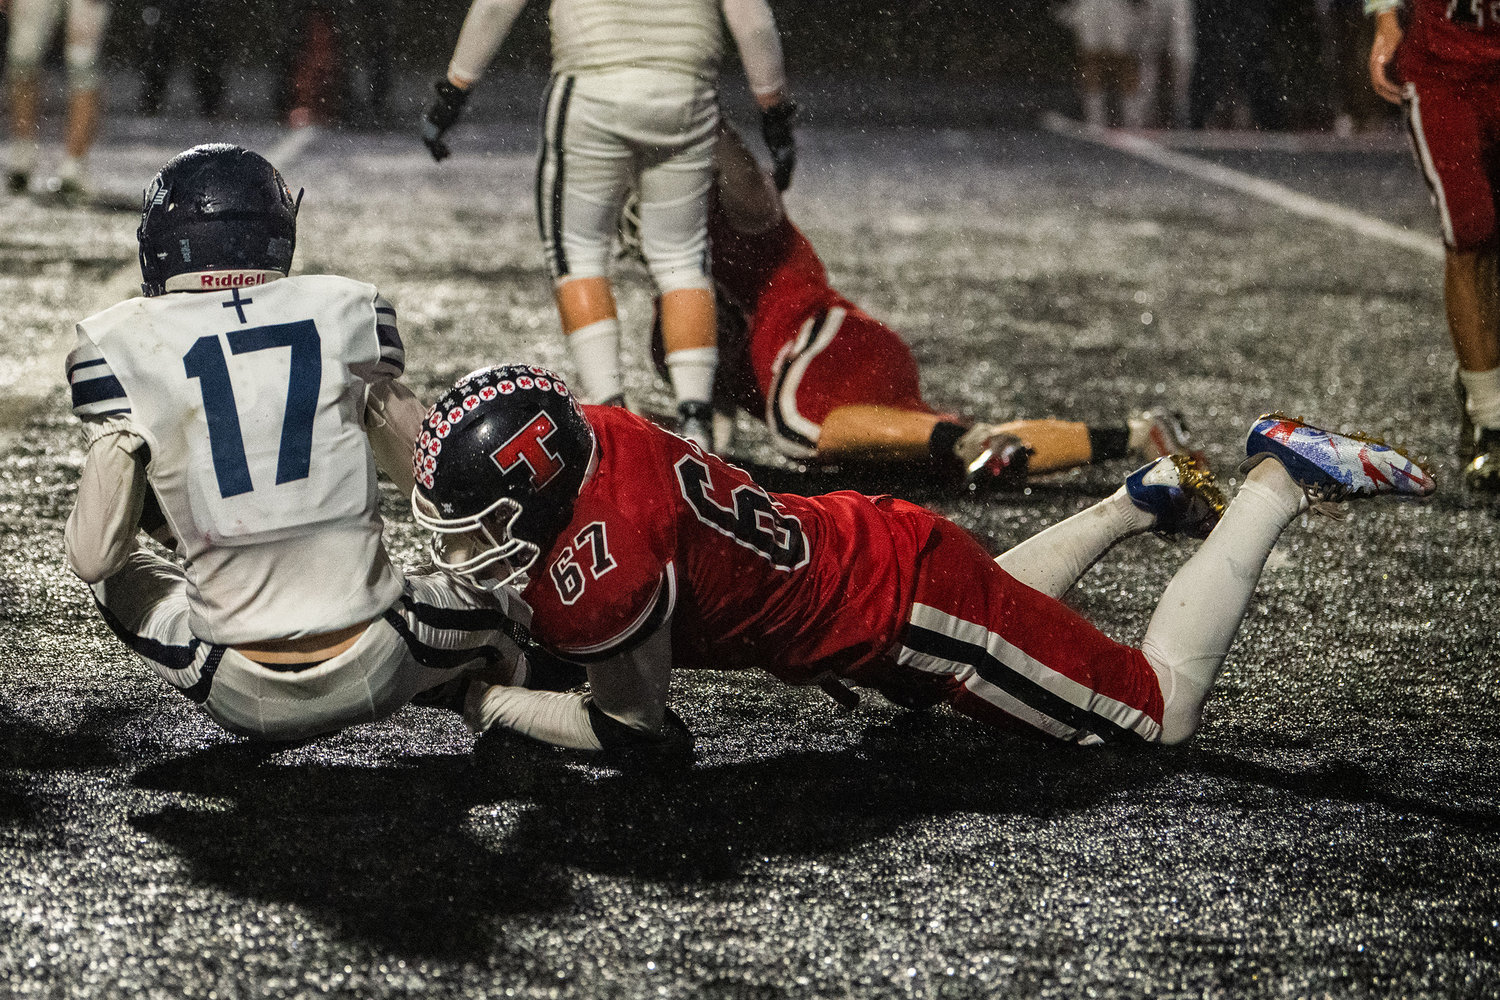 Tenino junior E.J. Haigler (67) makes a tackle Friday night at Beaver Stadium during a game against the King’s Way Christian Knights.